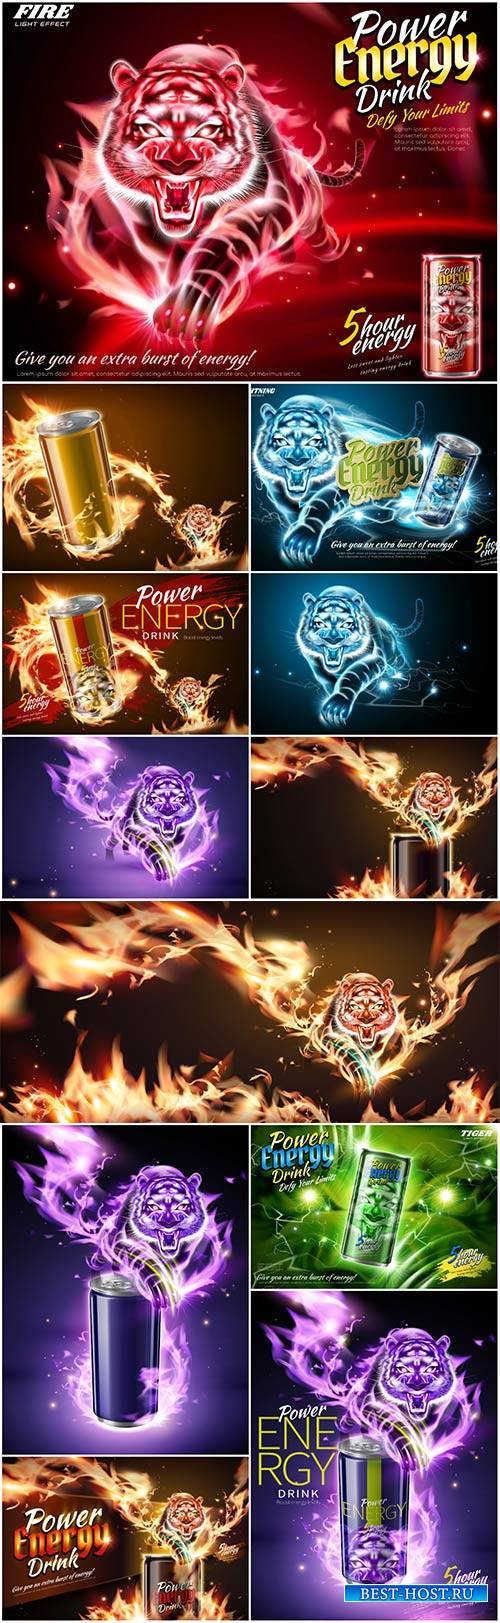 Power energy drink ads with flame tiger effect in 3d illustration